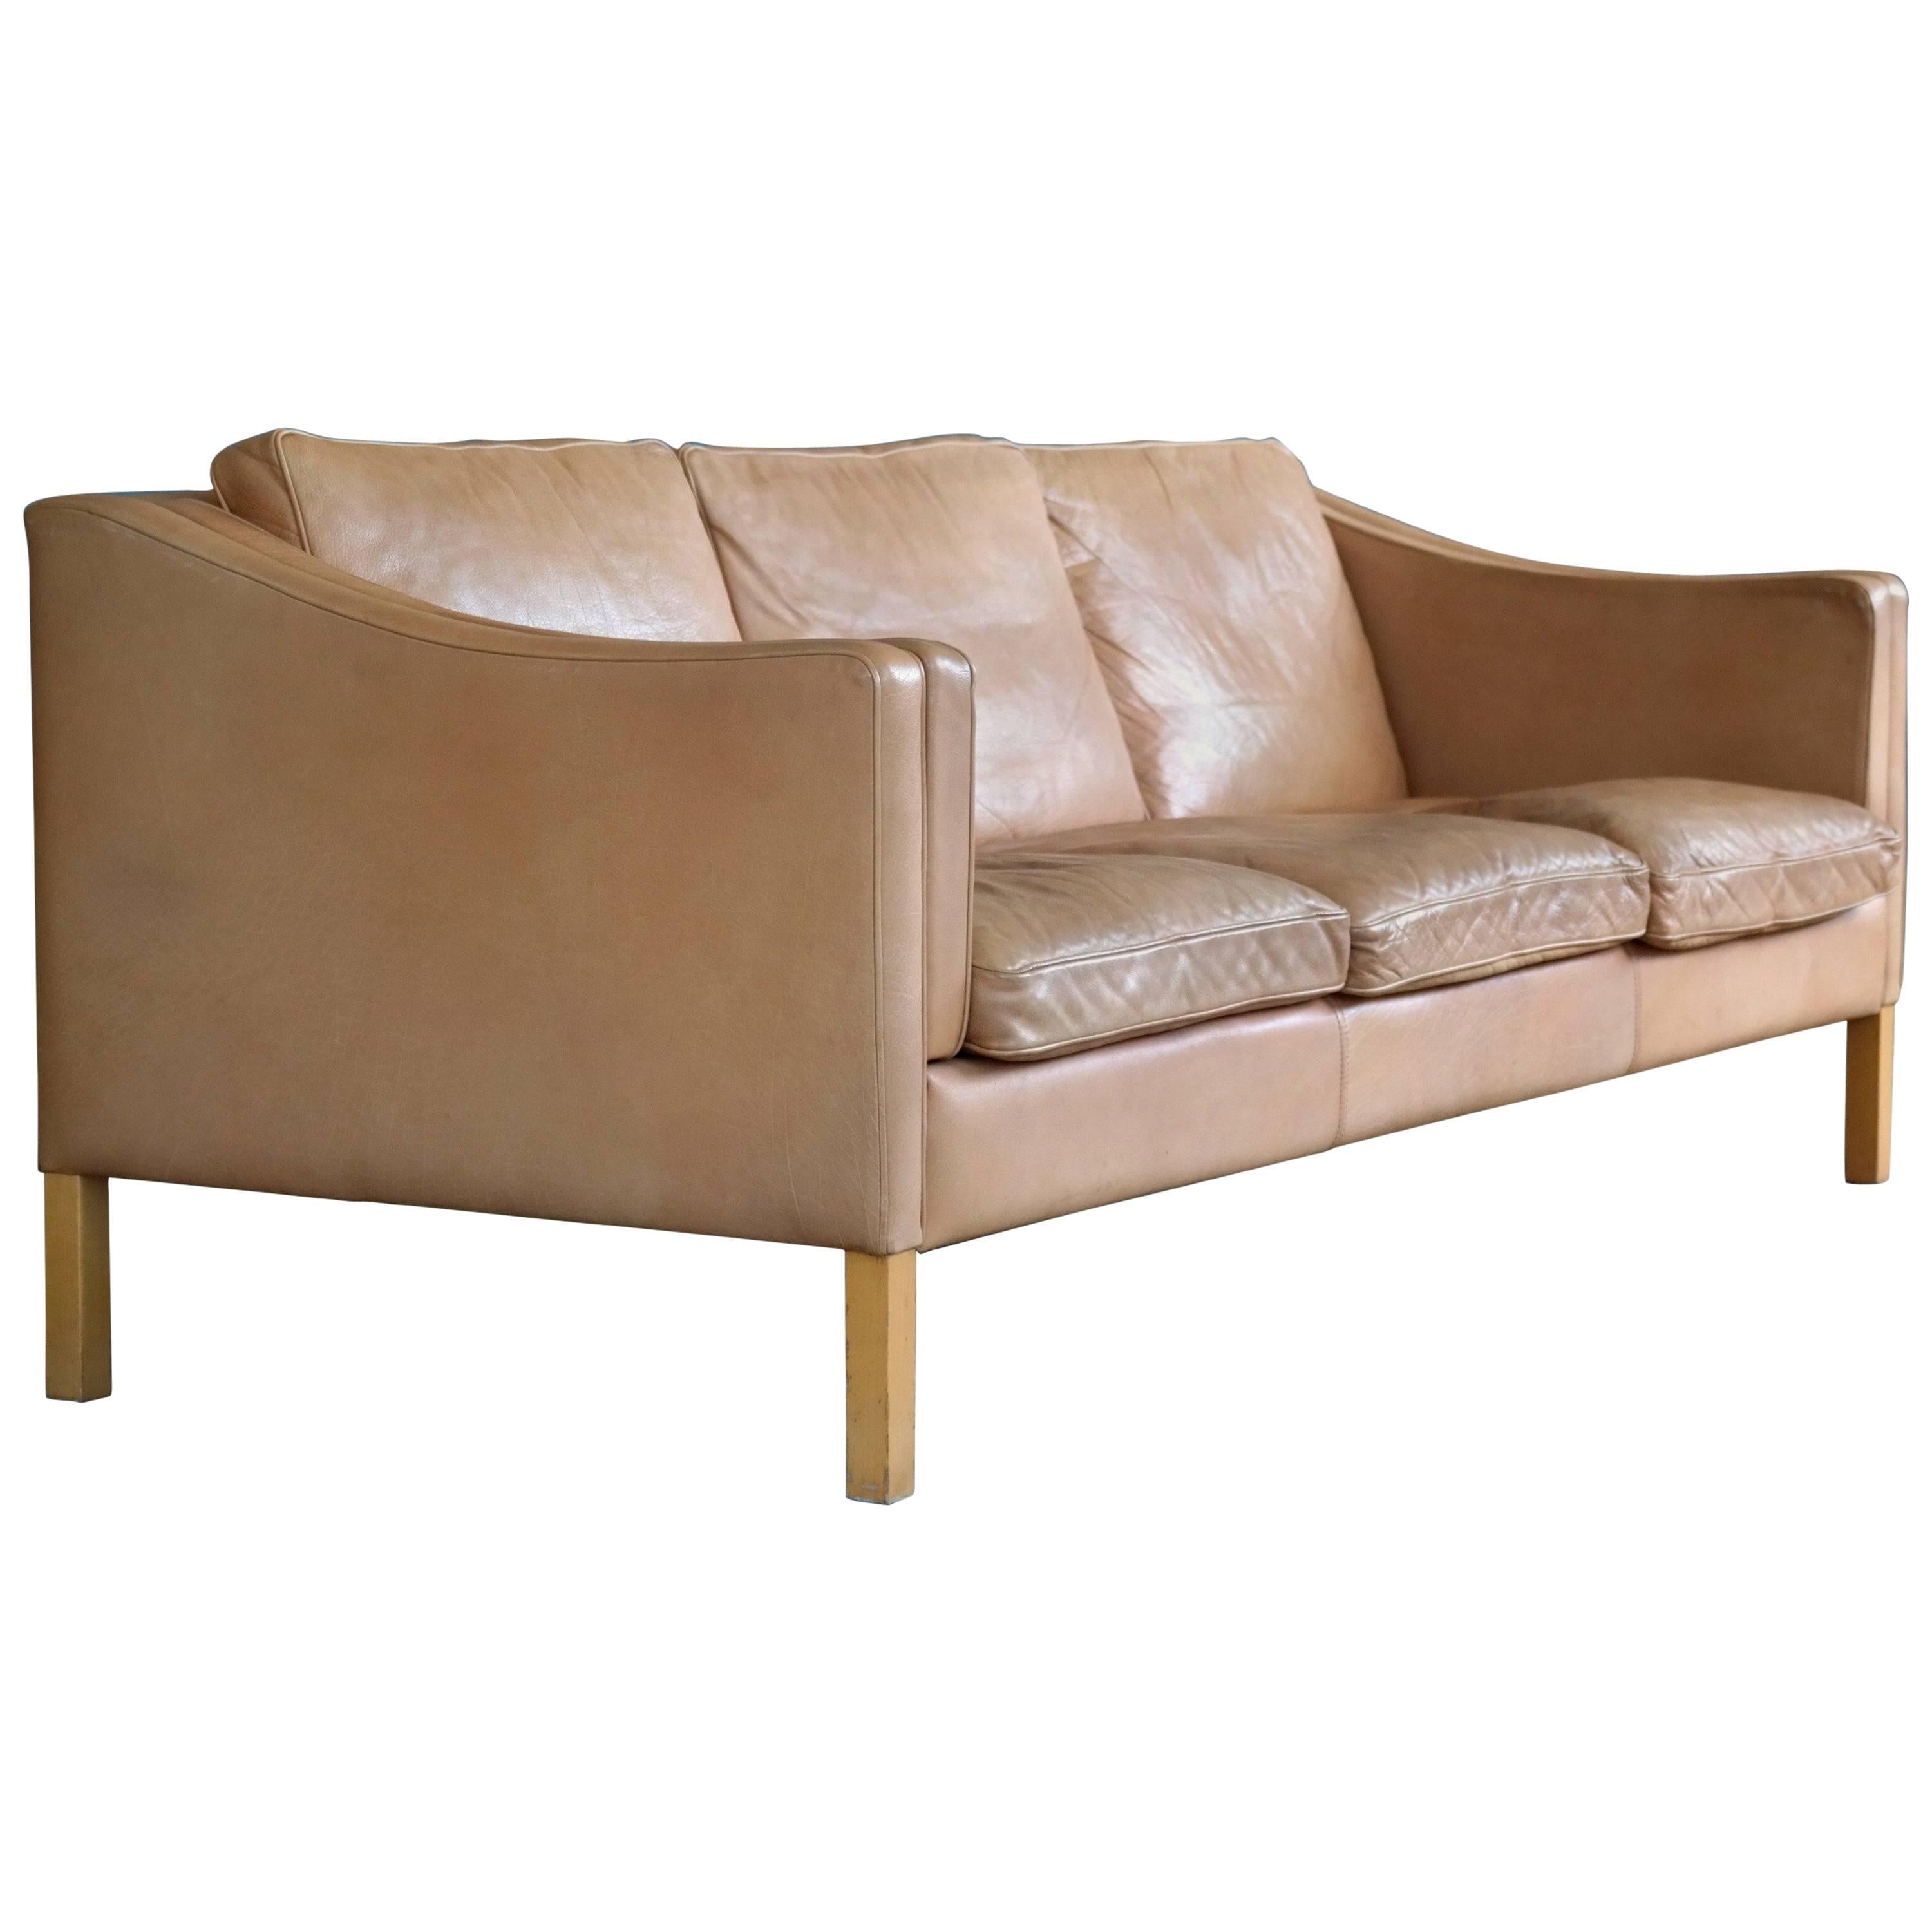 Børge Mogensen Style Three-Seat Sofa Model 2213 in Tan Leather by Stouby Mobler